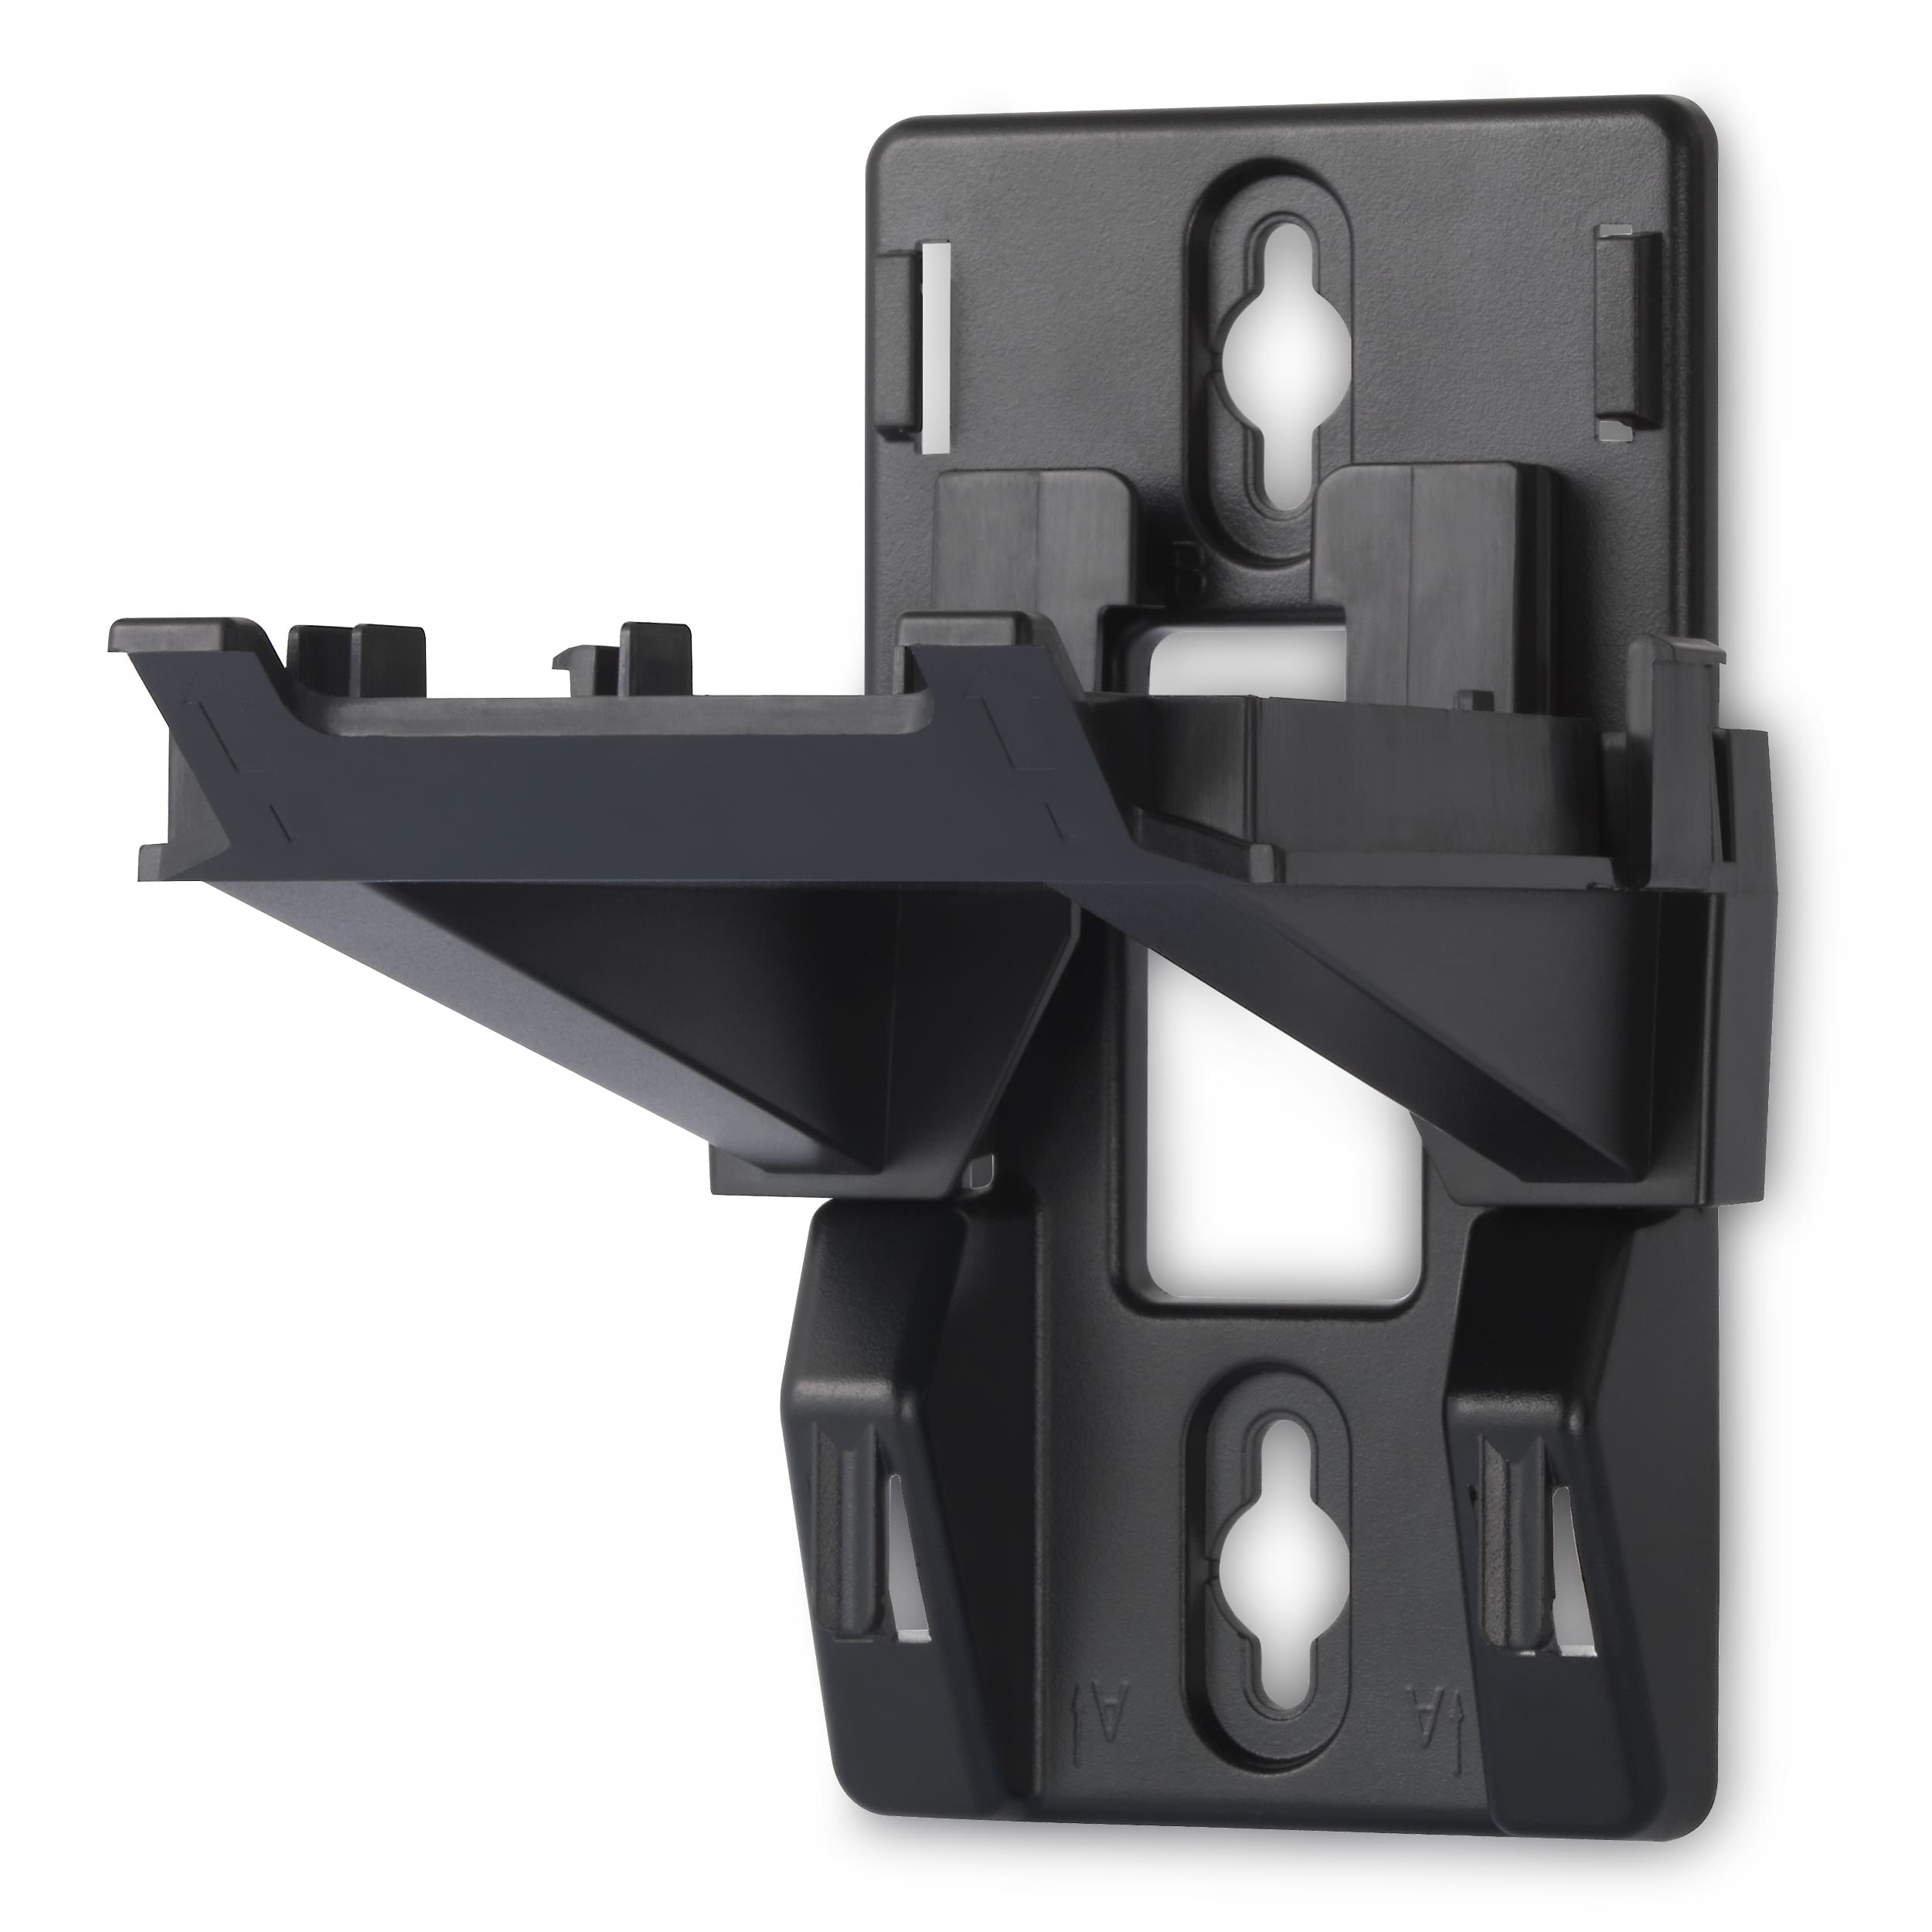 Wall mount for IS8251 series - view 1